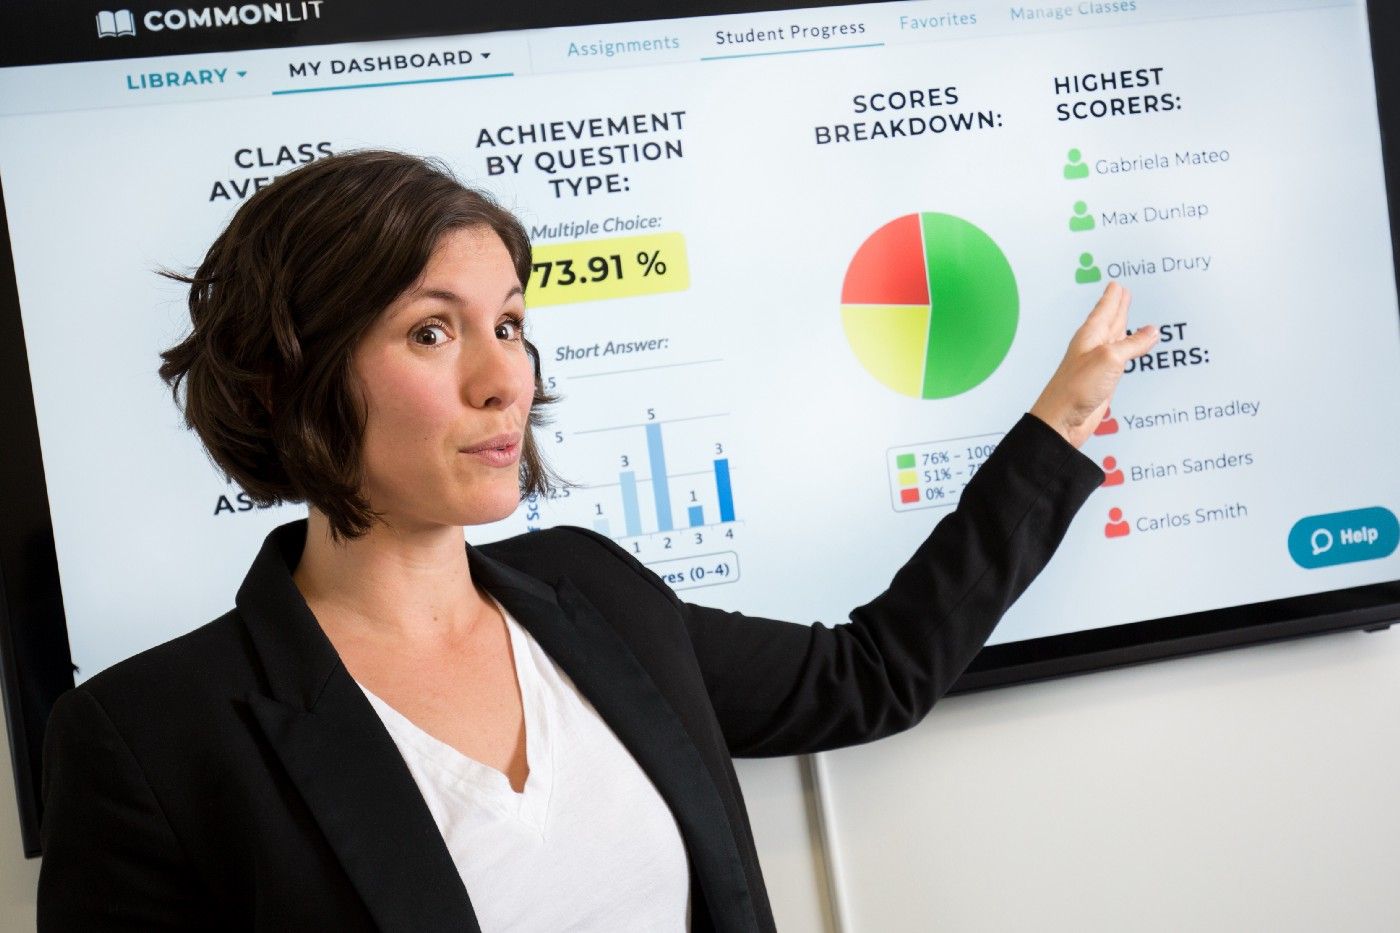 A woman presenting the CommonLit data dashboard